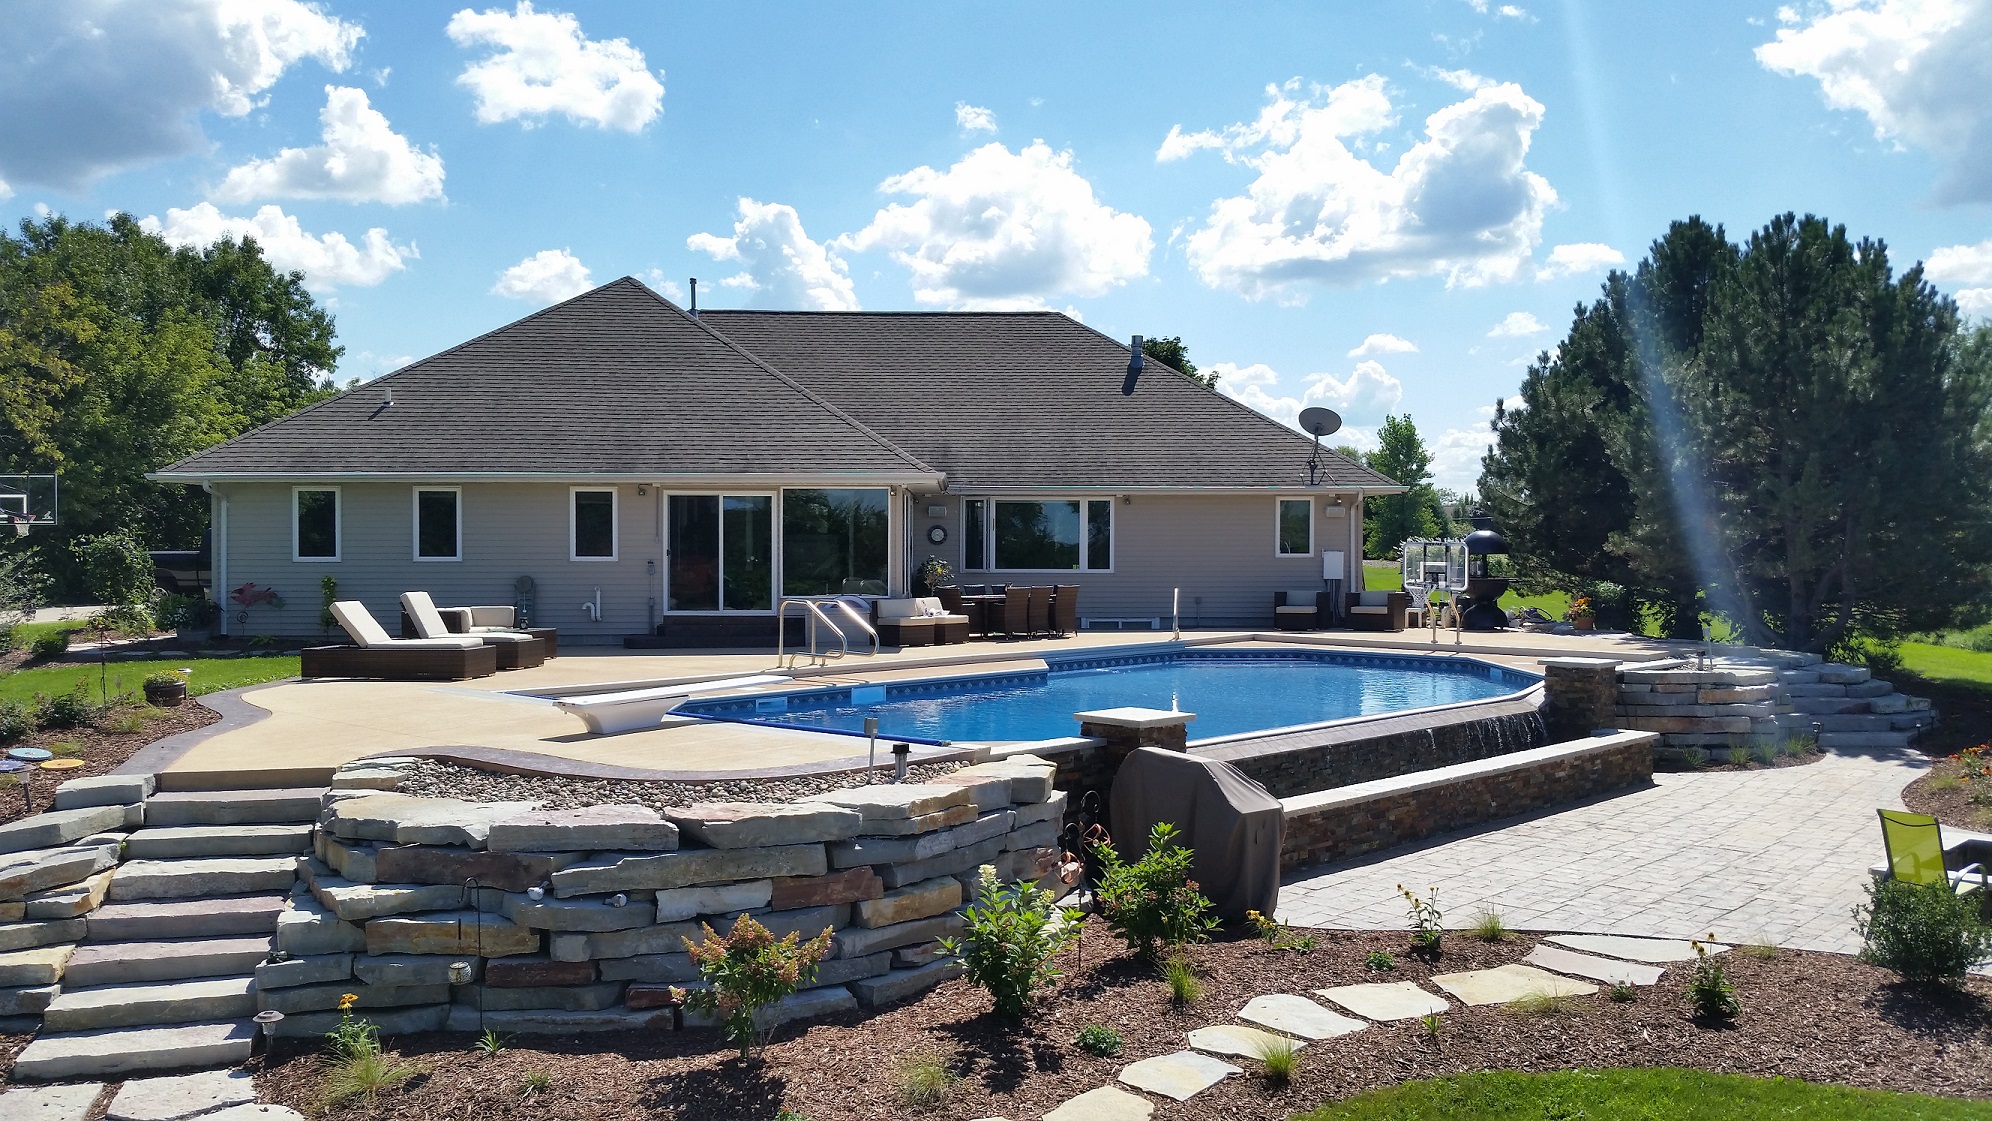 Spring's Pools & Spas W6119 Hill and Dale Rd, Plymouth Wisconsin 53073